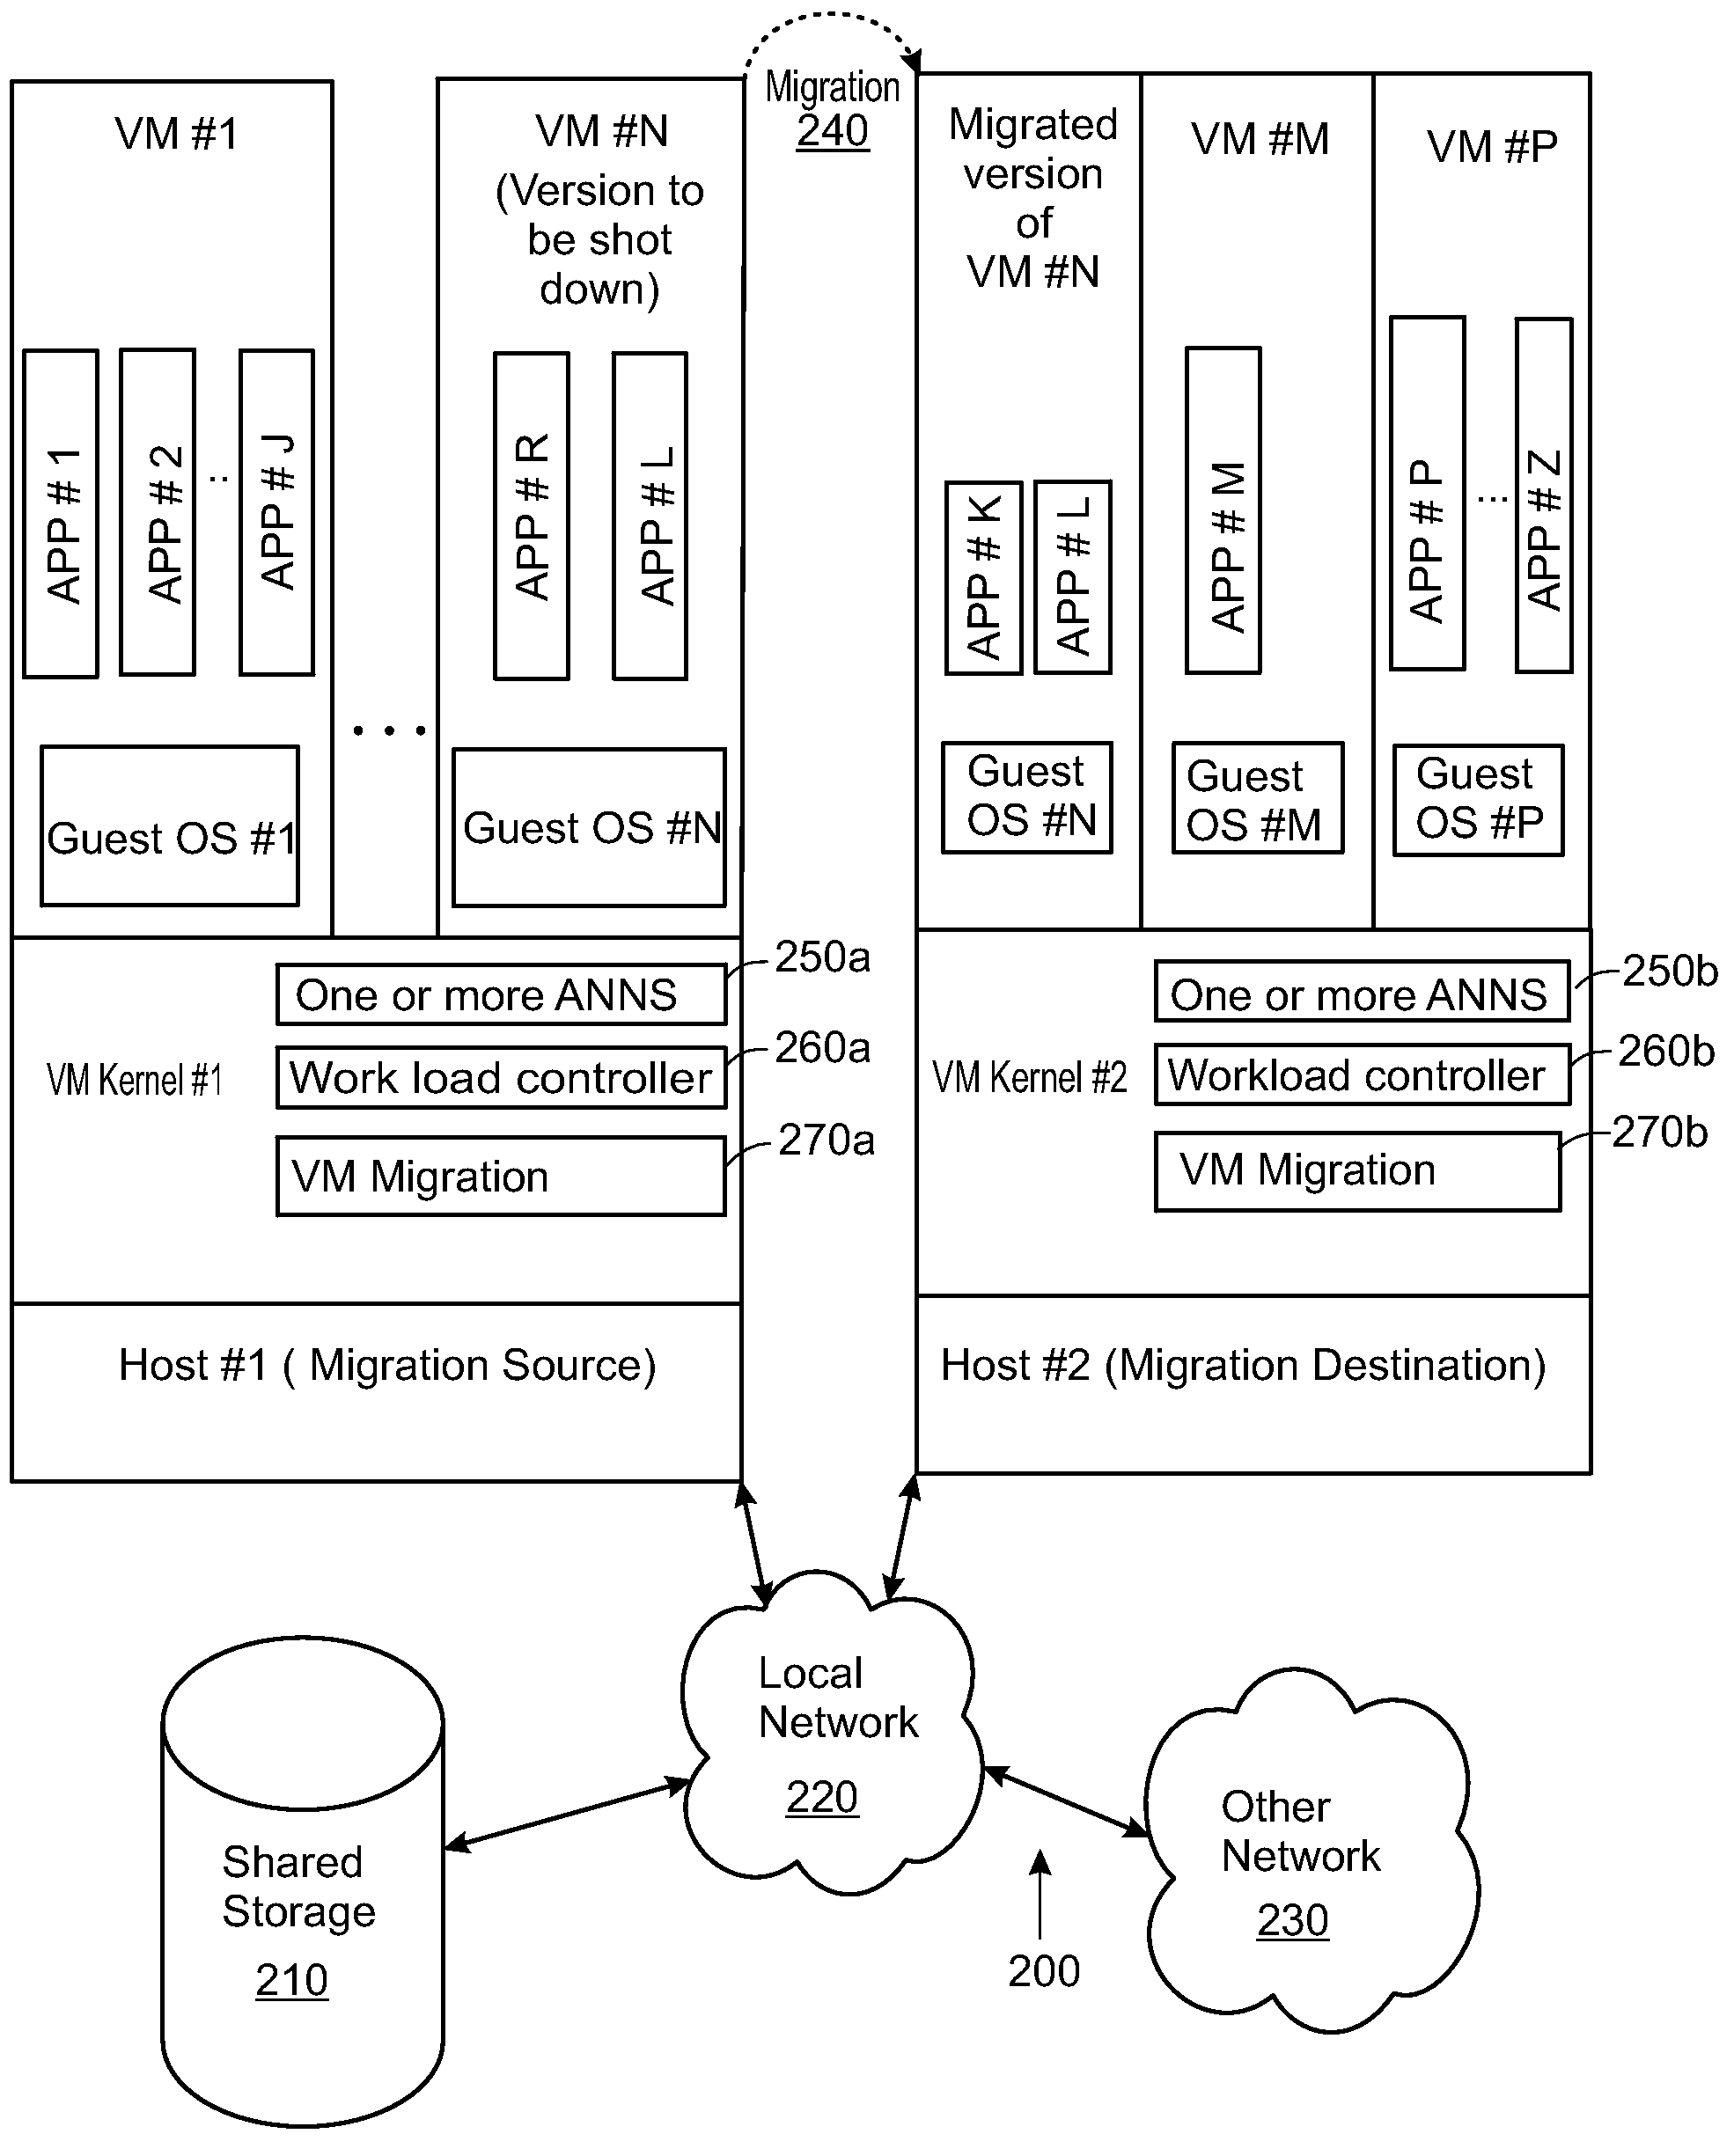 Artificial neural network for balancing workload by migrating computing tasks across hosts